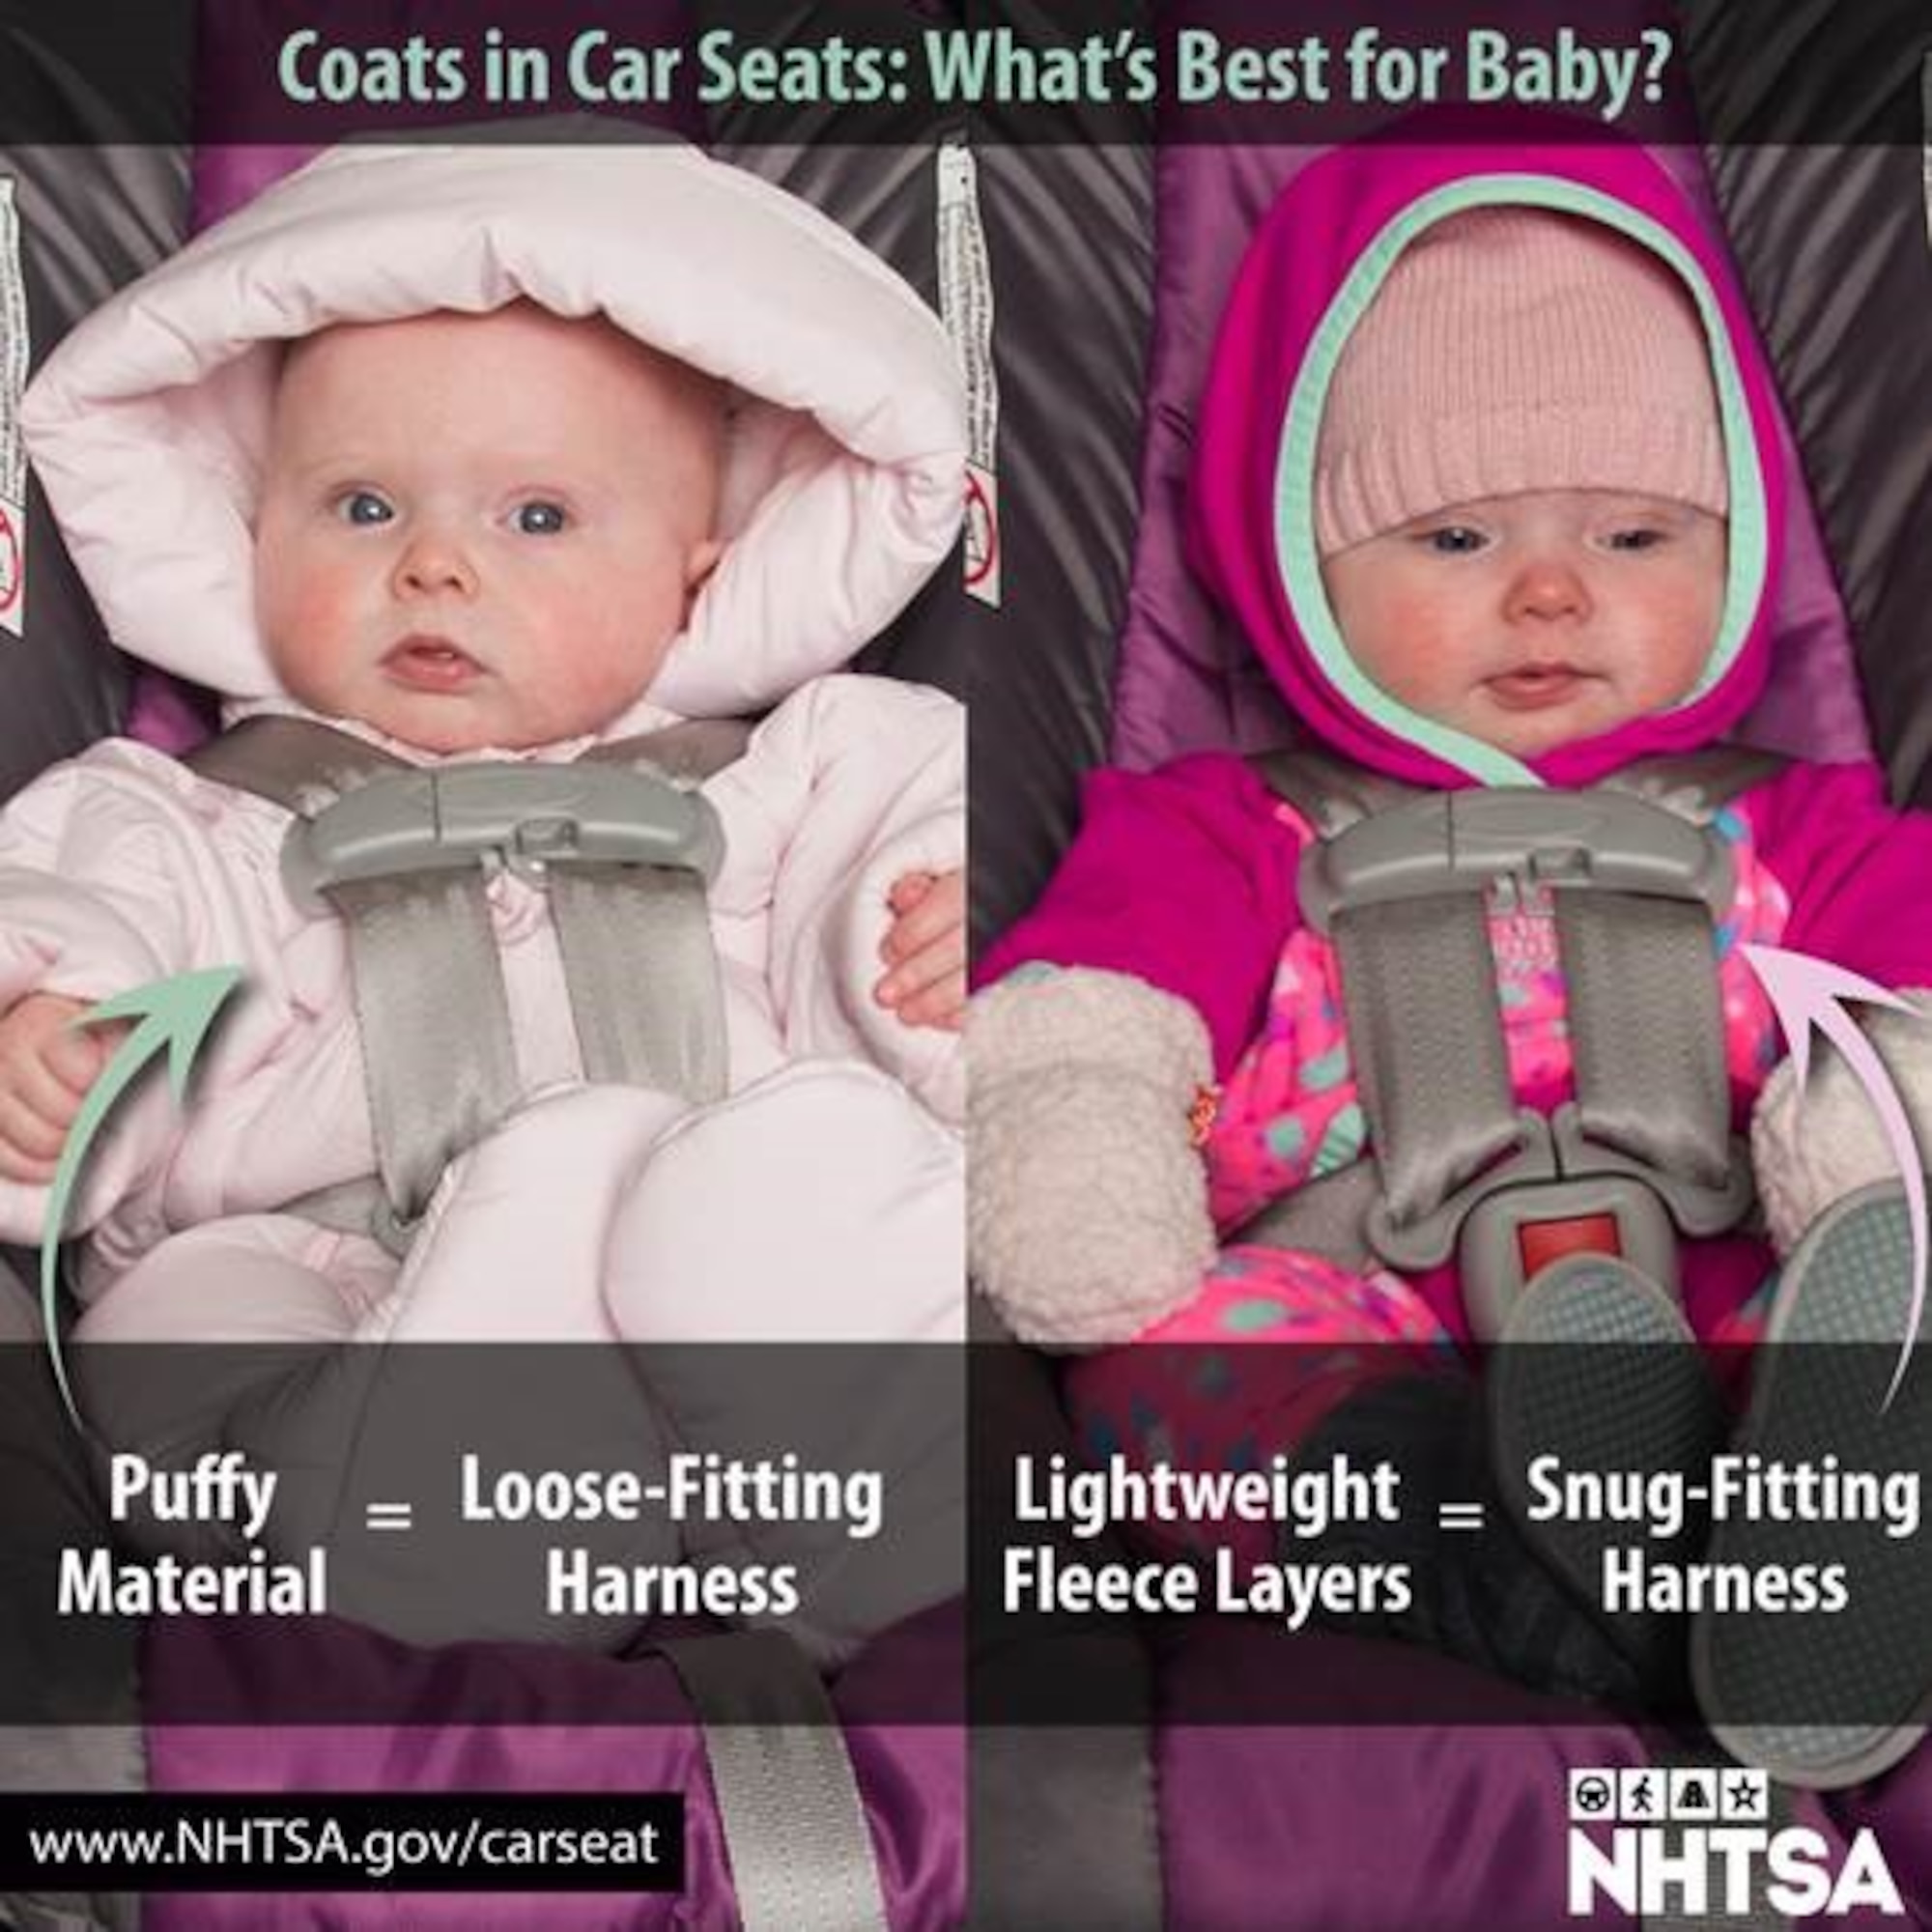 Coats in Car Seats: What's Best for Baby? (Courtesy Info Graphic)